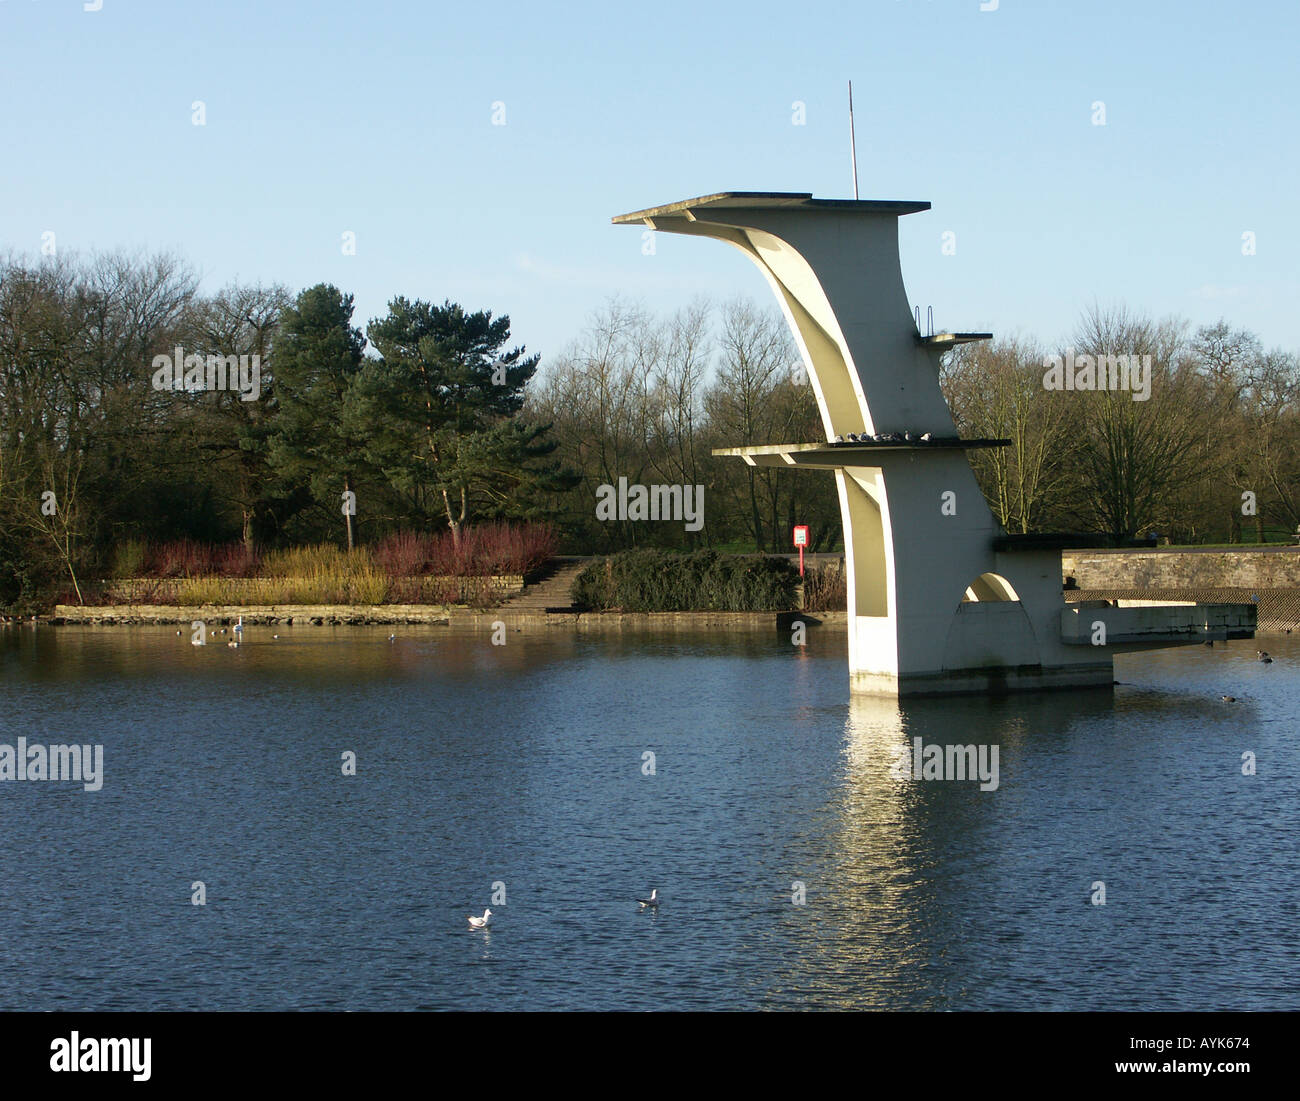 Coate Water Country Park Swindon Wiltshire, UK Banque D'Images